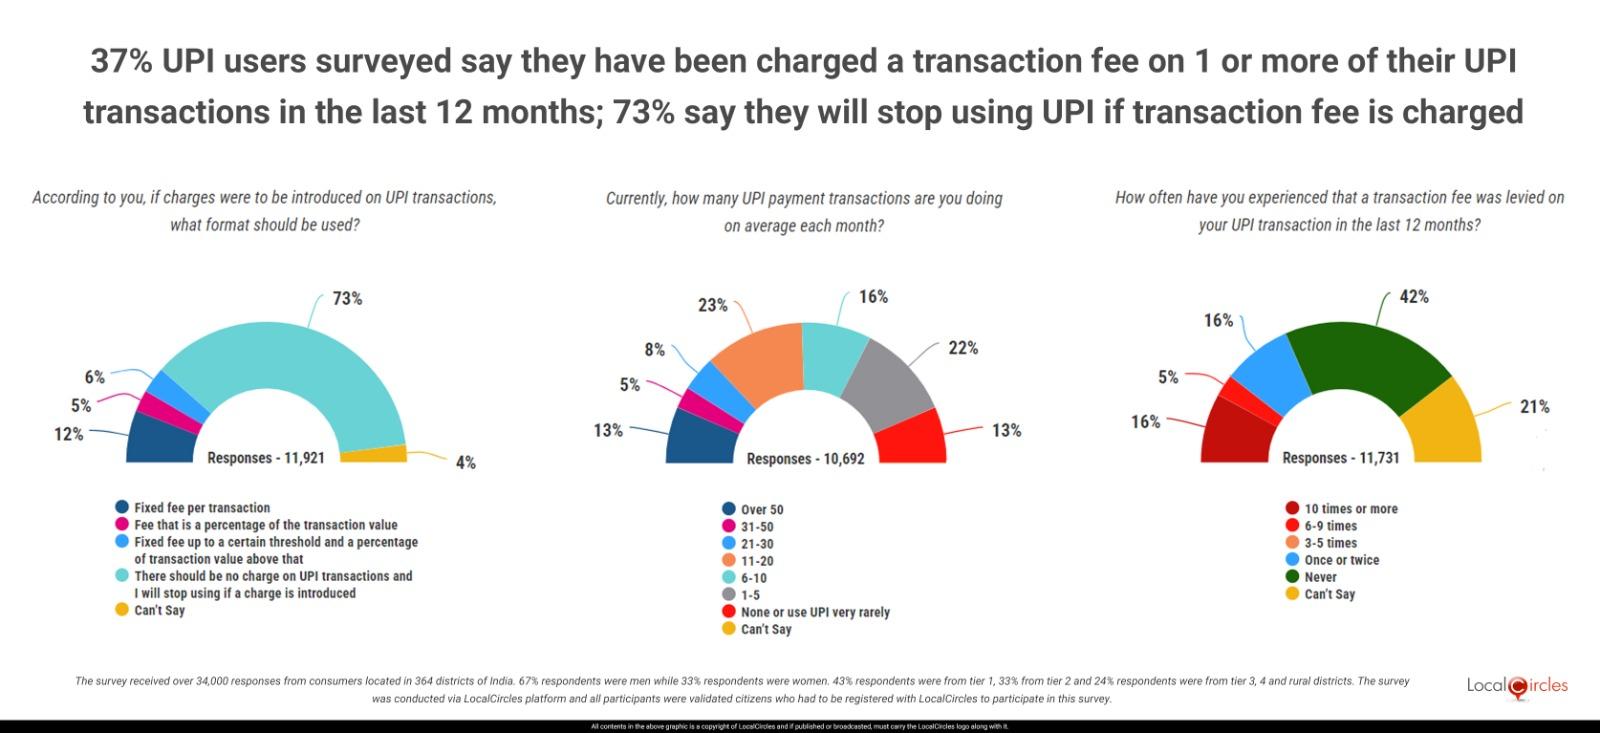 37% UPI users surveyed say they have been charged transaction fee once or more in the last 12 months